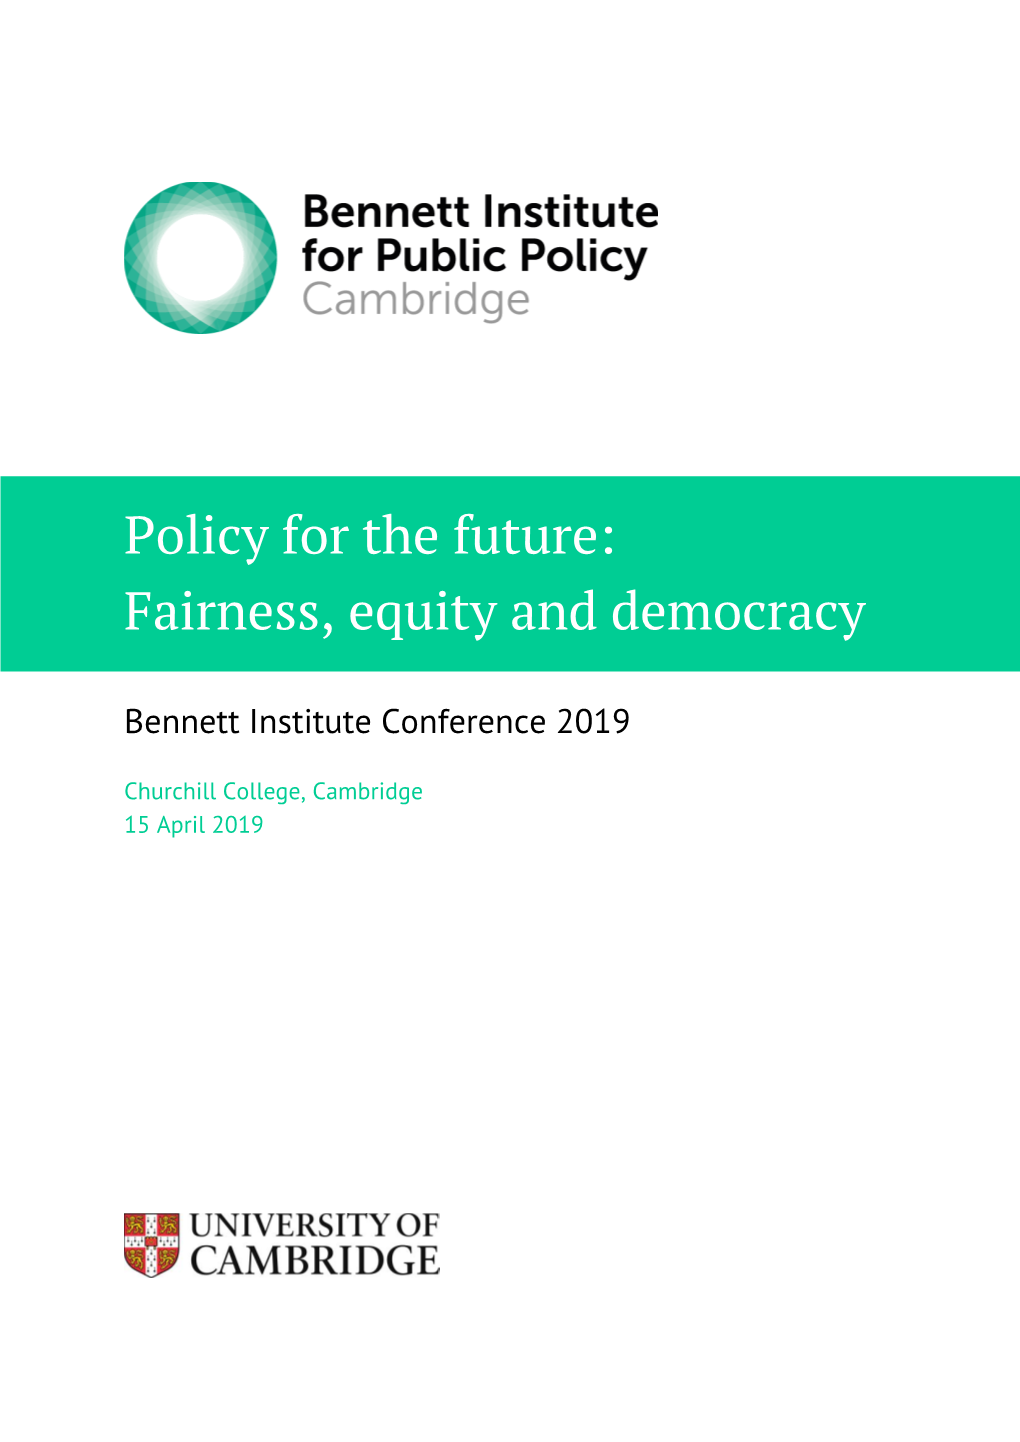 Policy for the Future: Fairness, Equity and Democracy